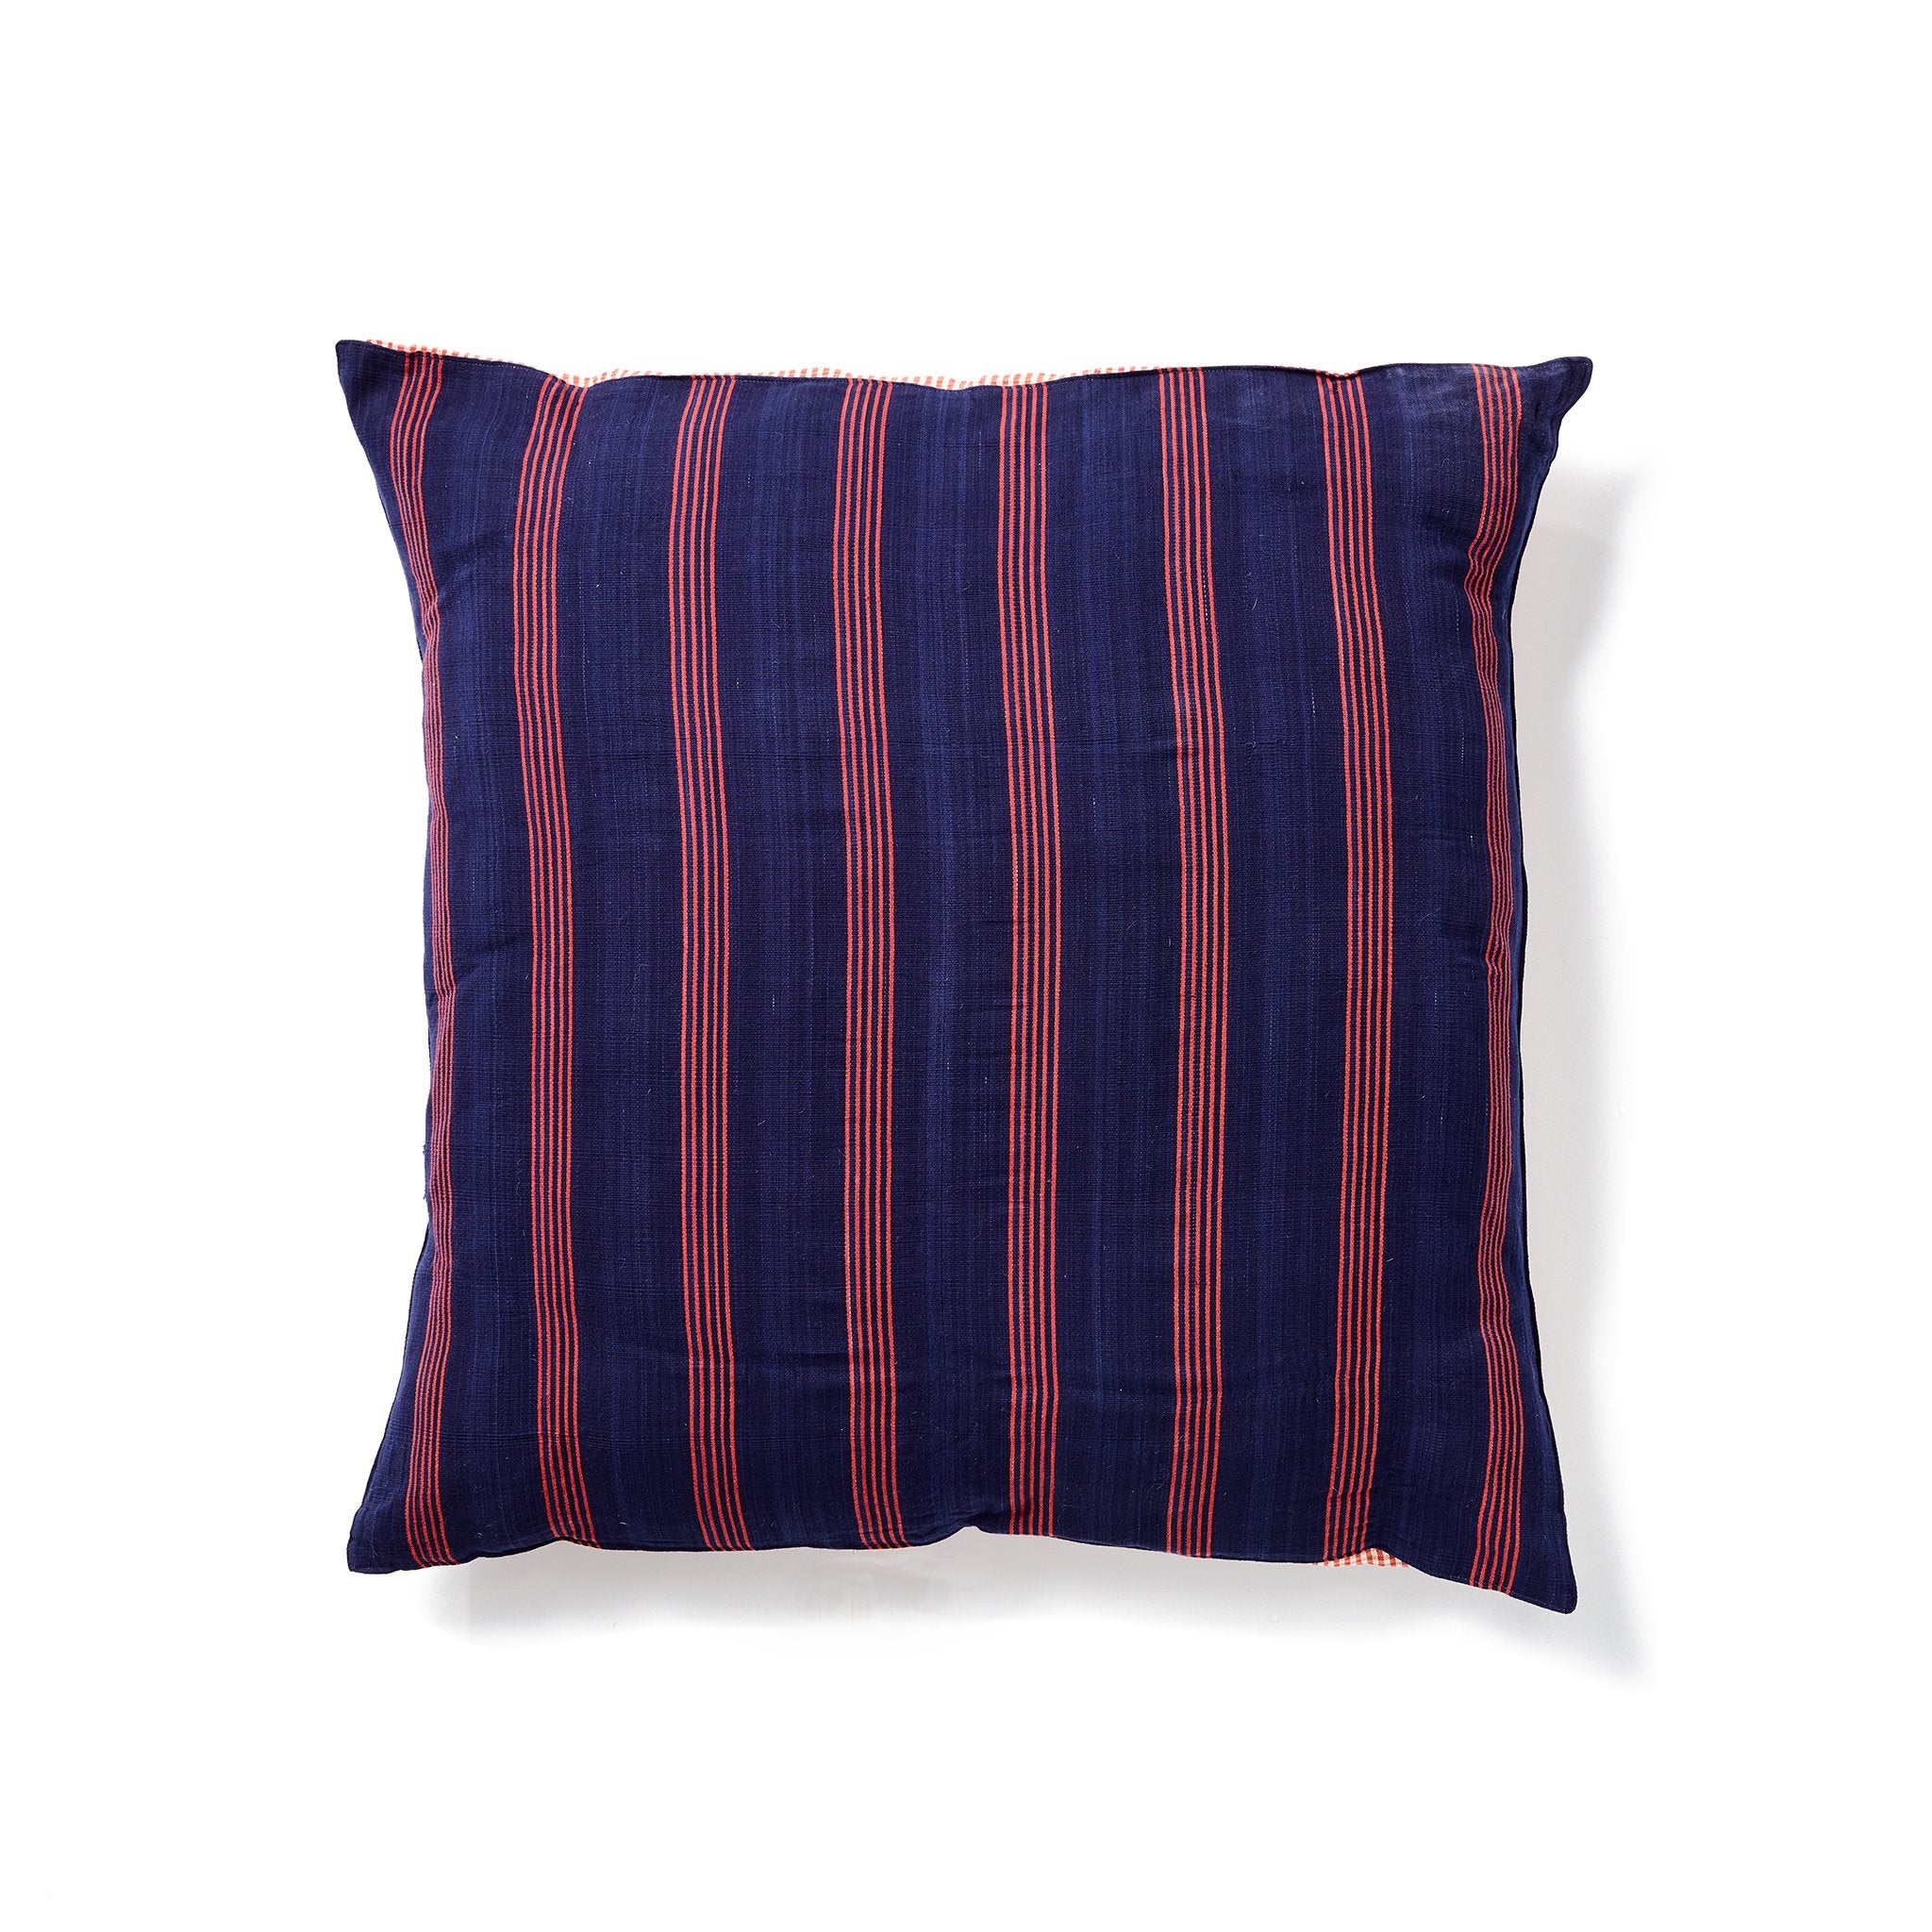 Perfect for lounging, this navy and red stripe floor cushion is a must for indoor/outdoor living, hand-woven from 100% Ethiopian cotton and complete with a Kapok filled inner cushion.